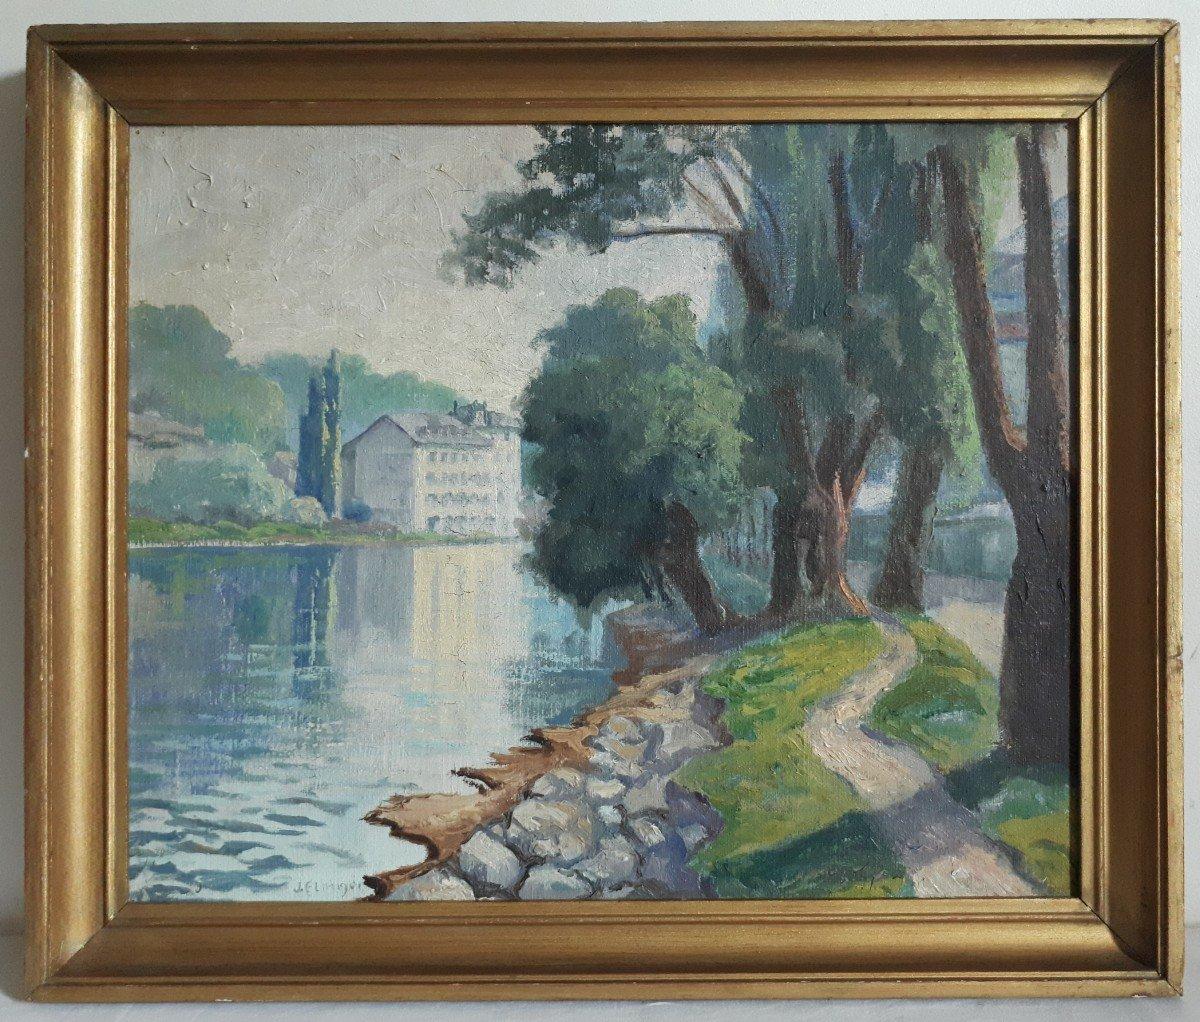 River in countryside, France, Original Antique Oil on Canvas, Impressionist 